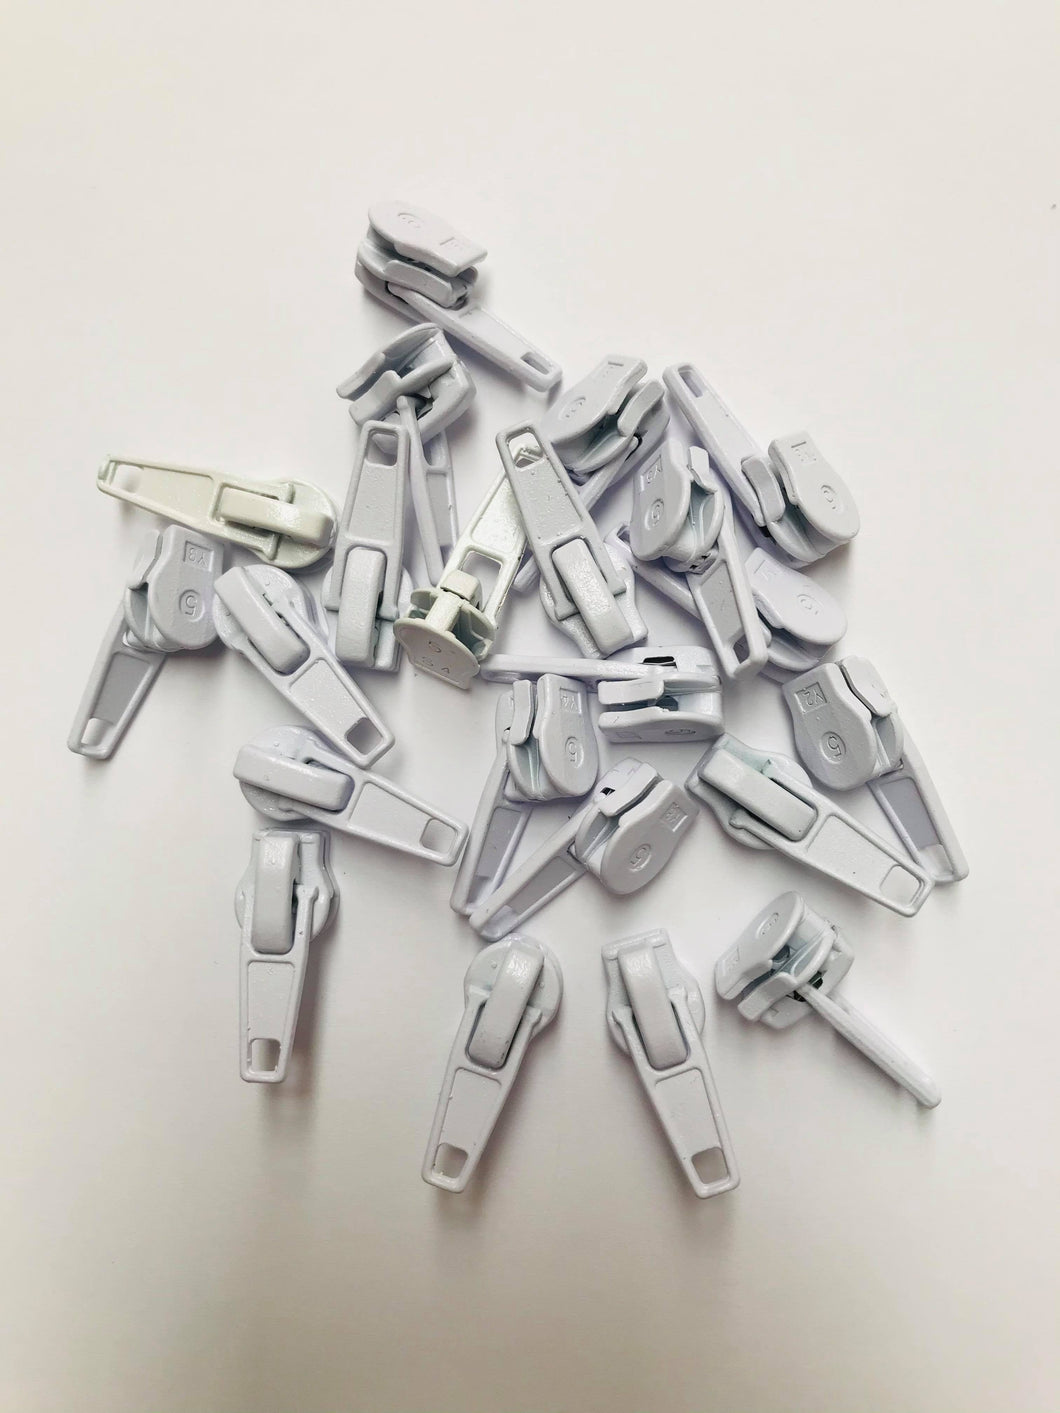 No 5 white plastic-coated metal zip pullers or ‘sliders’ are to suit our continuous zip. 